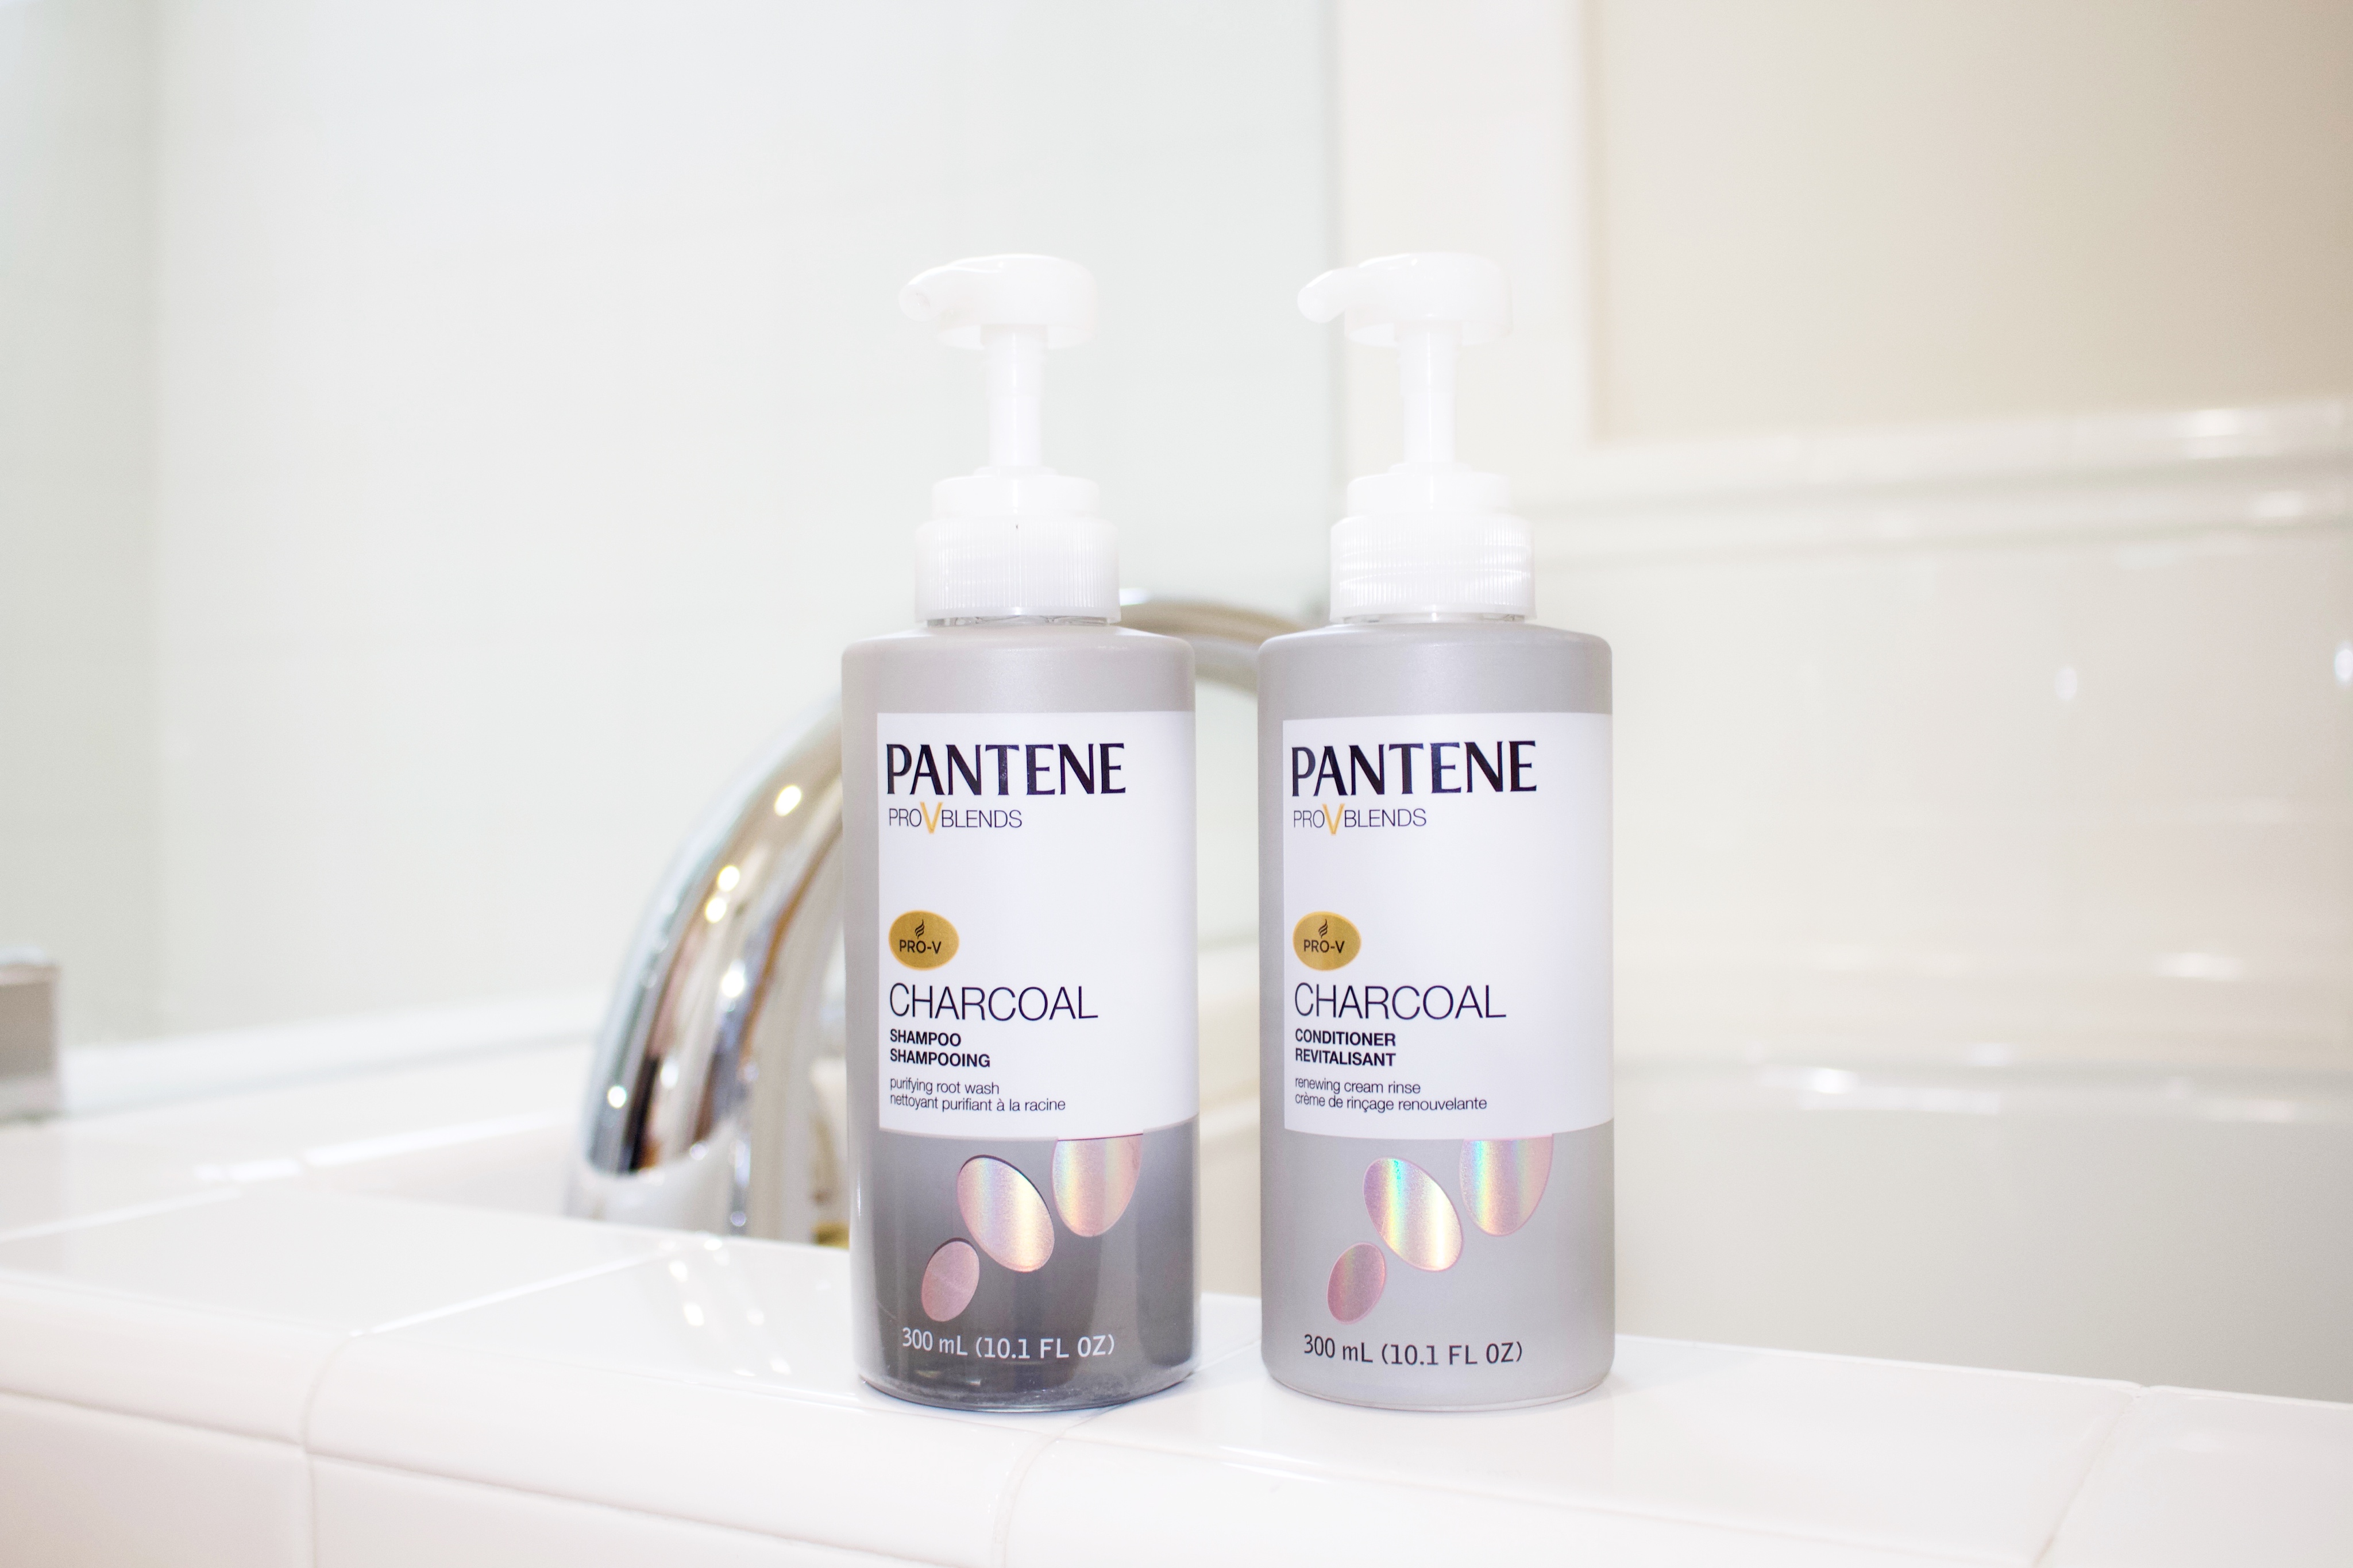 Pantene's Charcoal Shampoo + Conditioner review